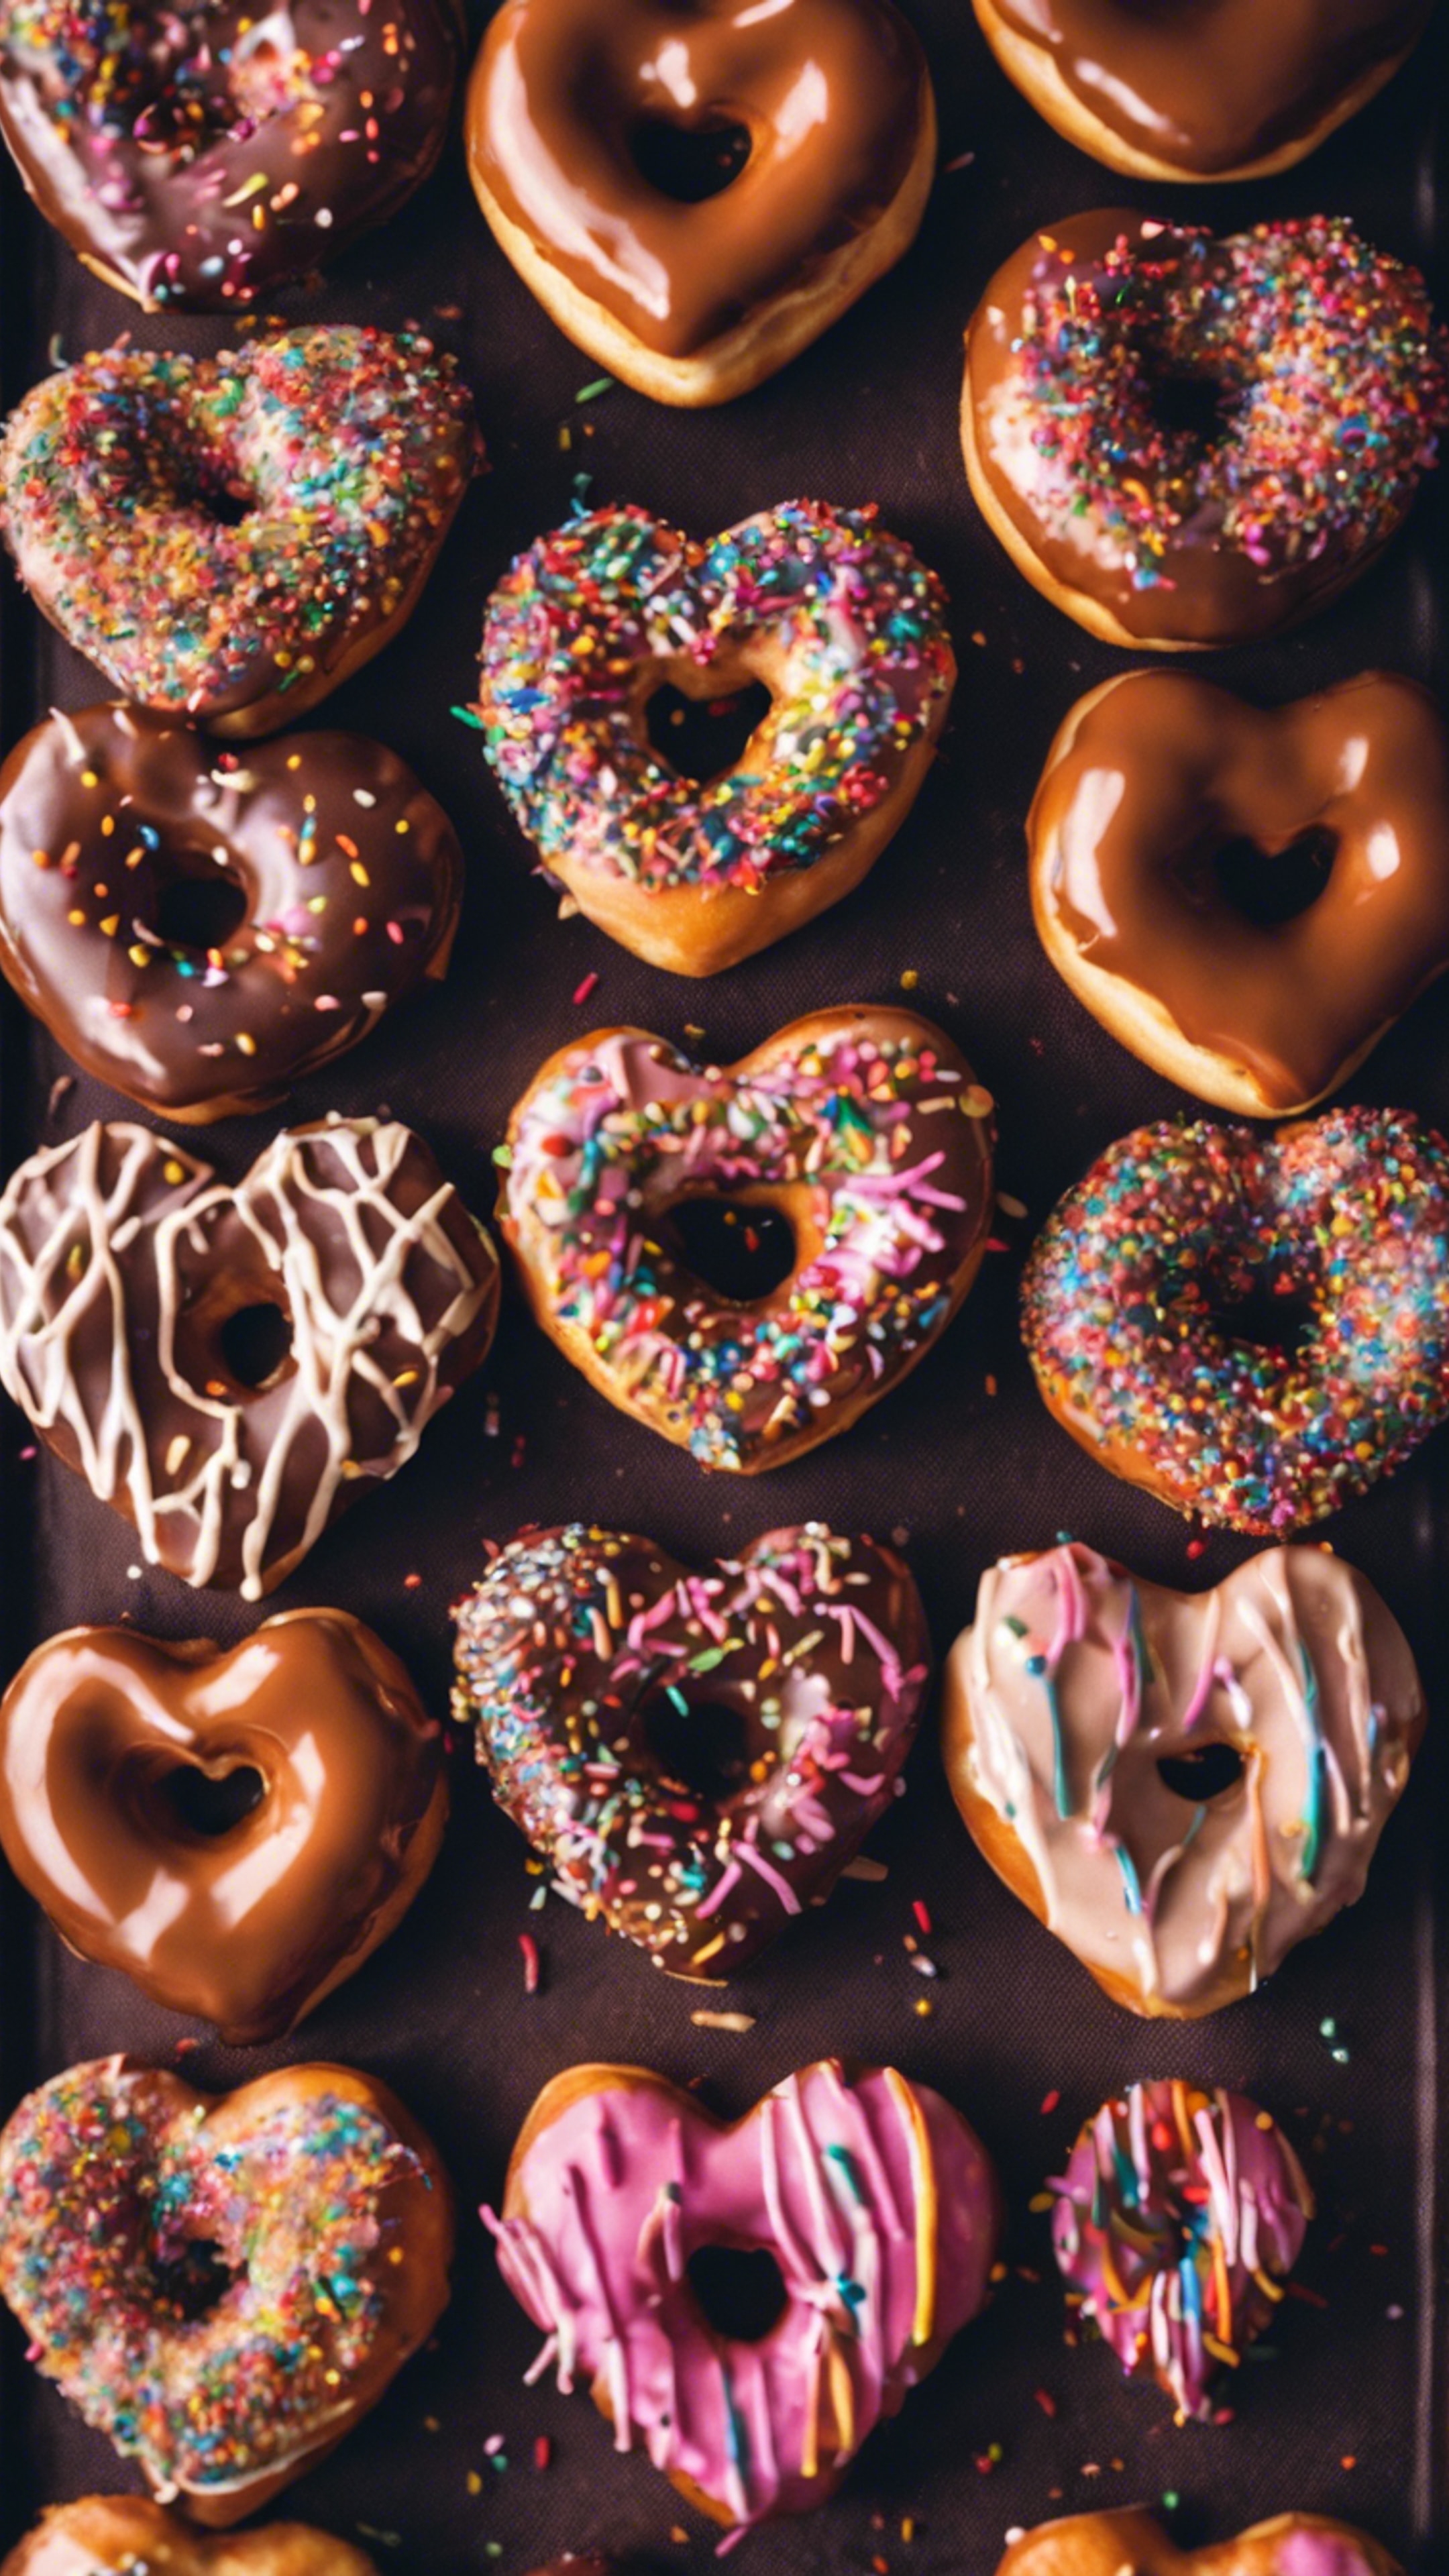 A sweet, heart-shaped donut with a brown chocolate glaze and colorful sprinkles, ideally for a lover's breakfast.壁紙[8cca10e8af8b48b8a02c]